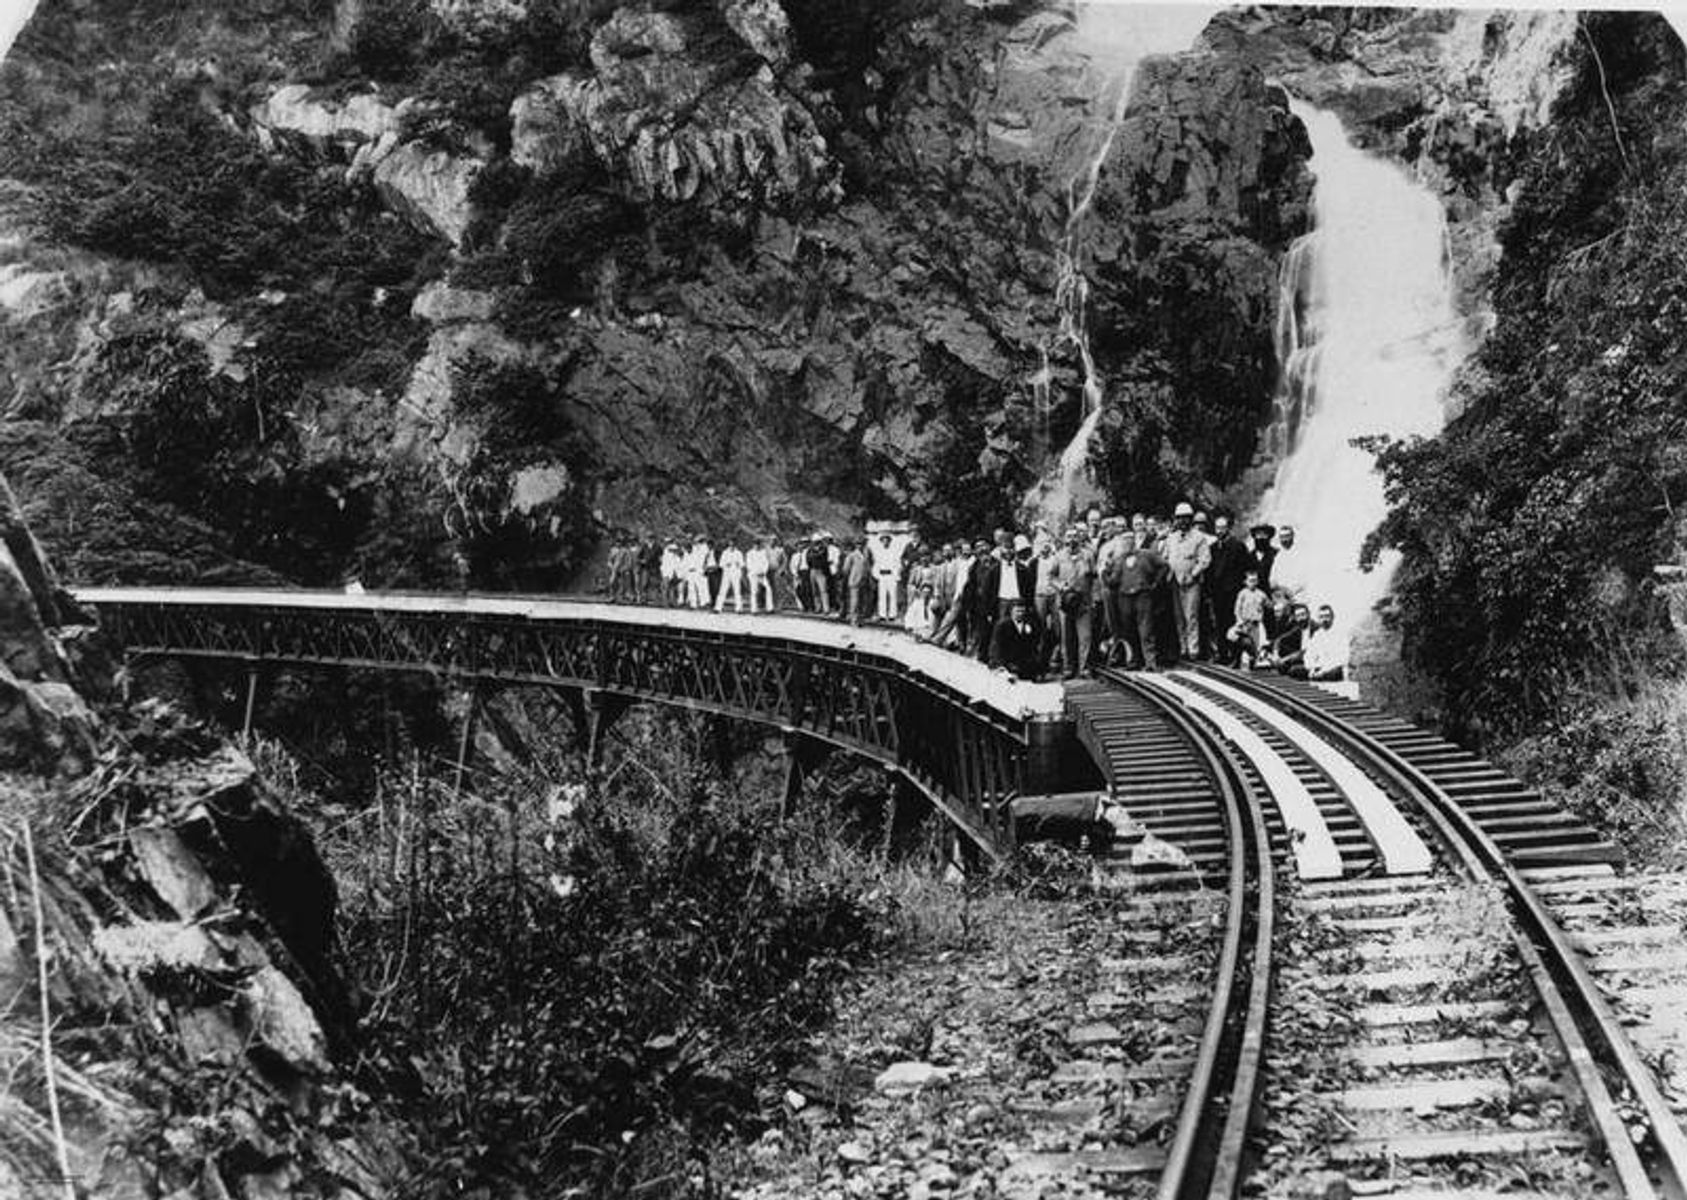 The Kuranda Train, A Structure And Engineering Feat